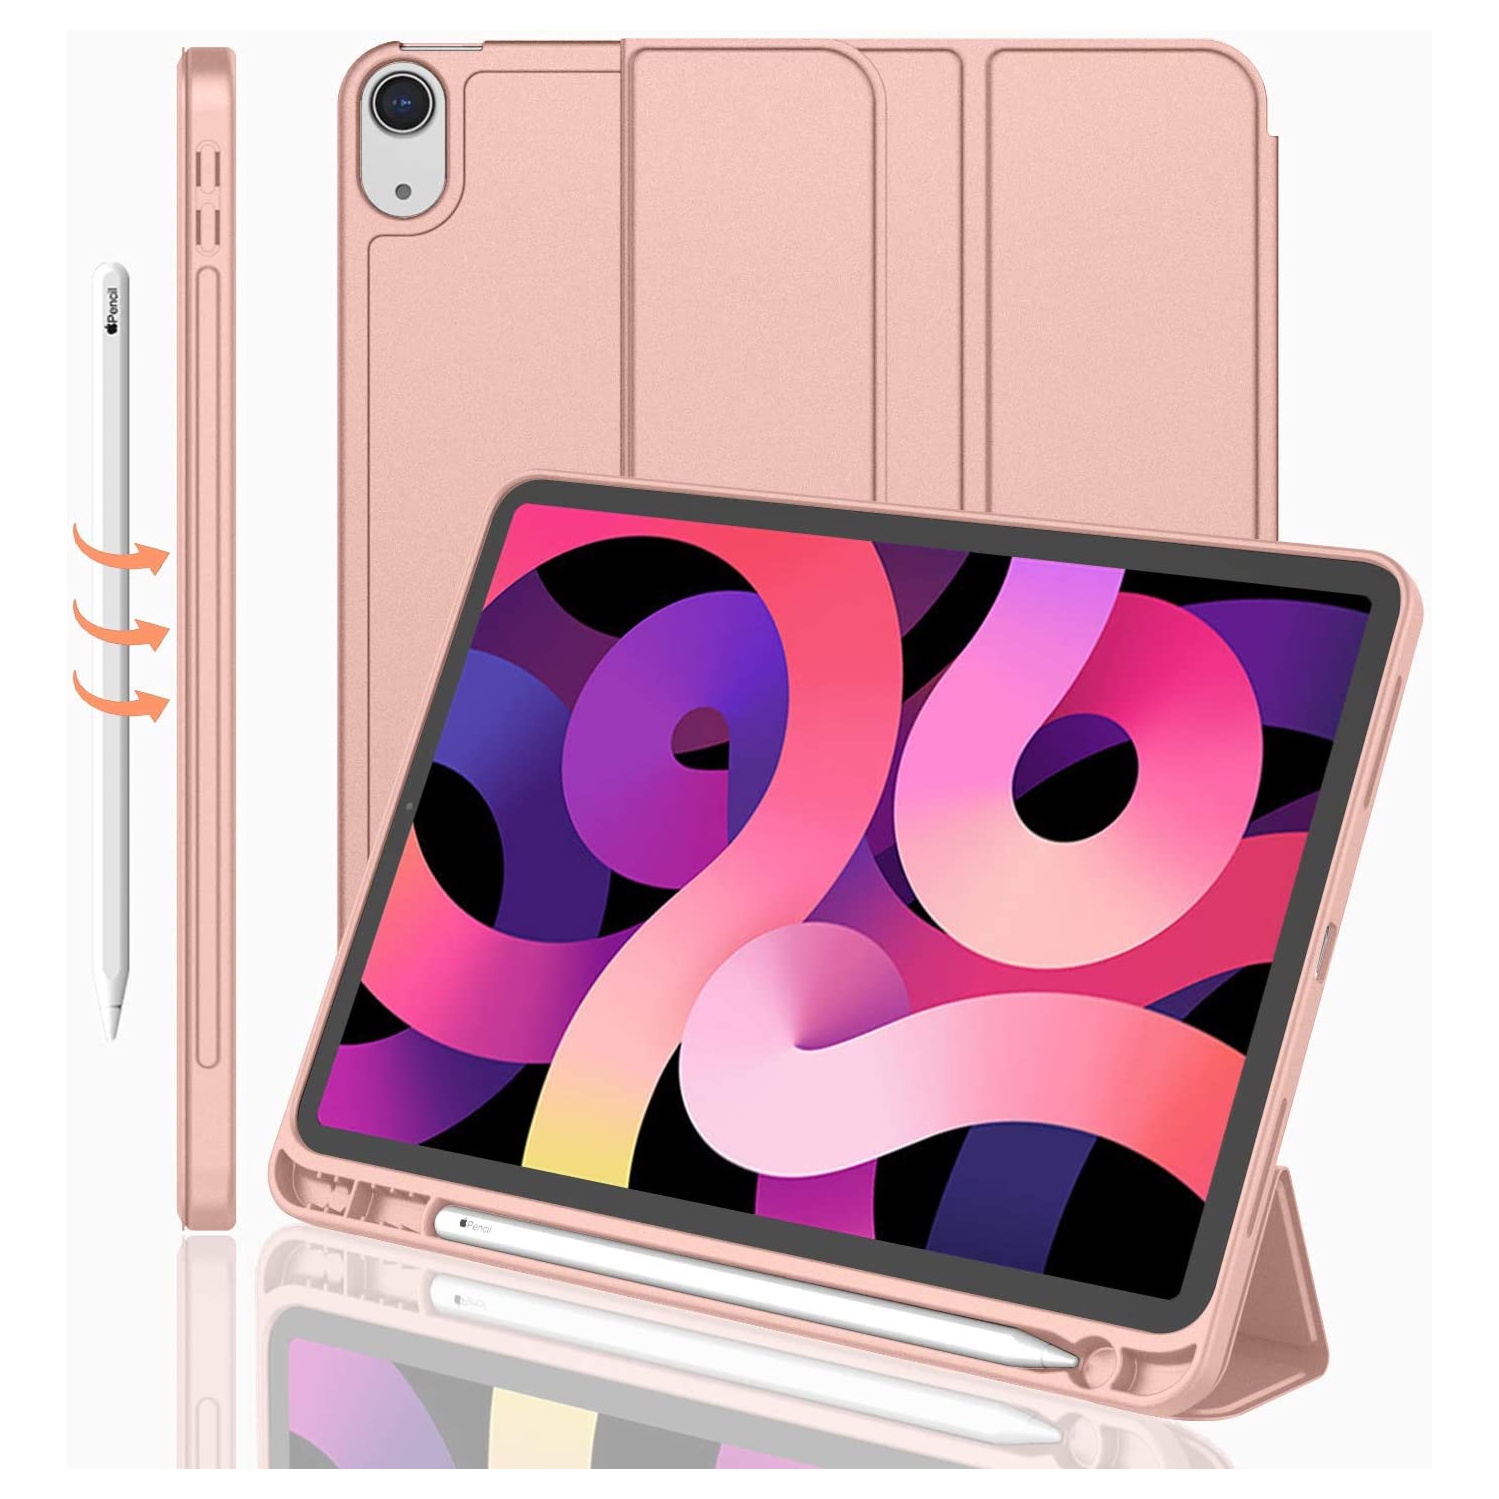 Slim Magnetic Smart Cover Stand Case with Auto Sleep/Wake & Pencil Holder for iPad Air 4 5 4th 5th Gen. 10.9", Rose Gold